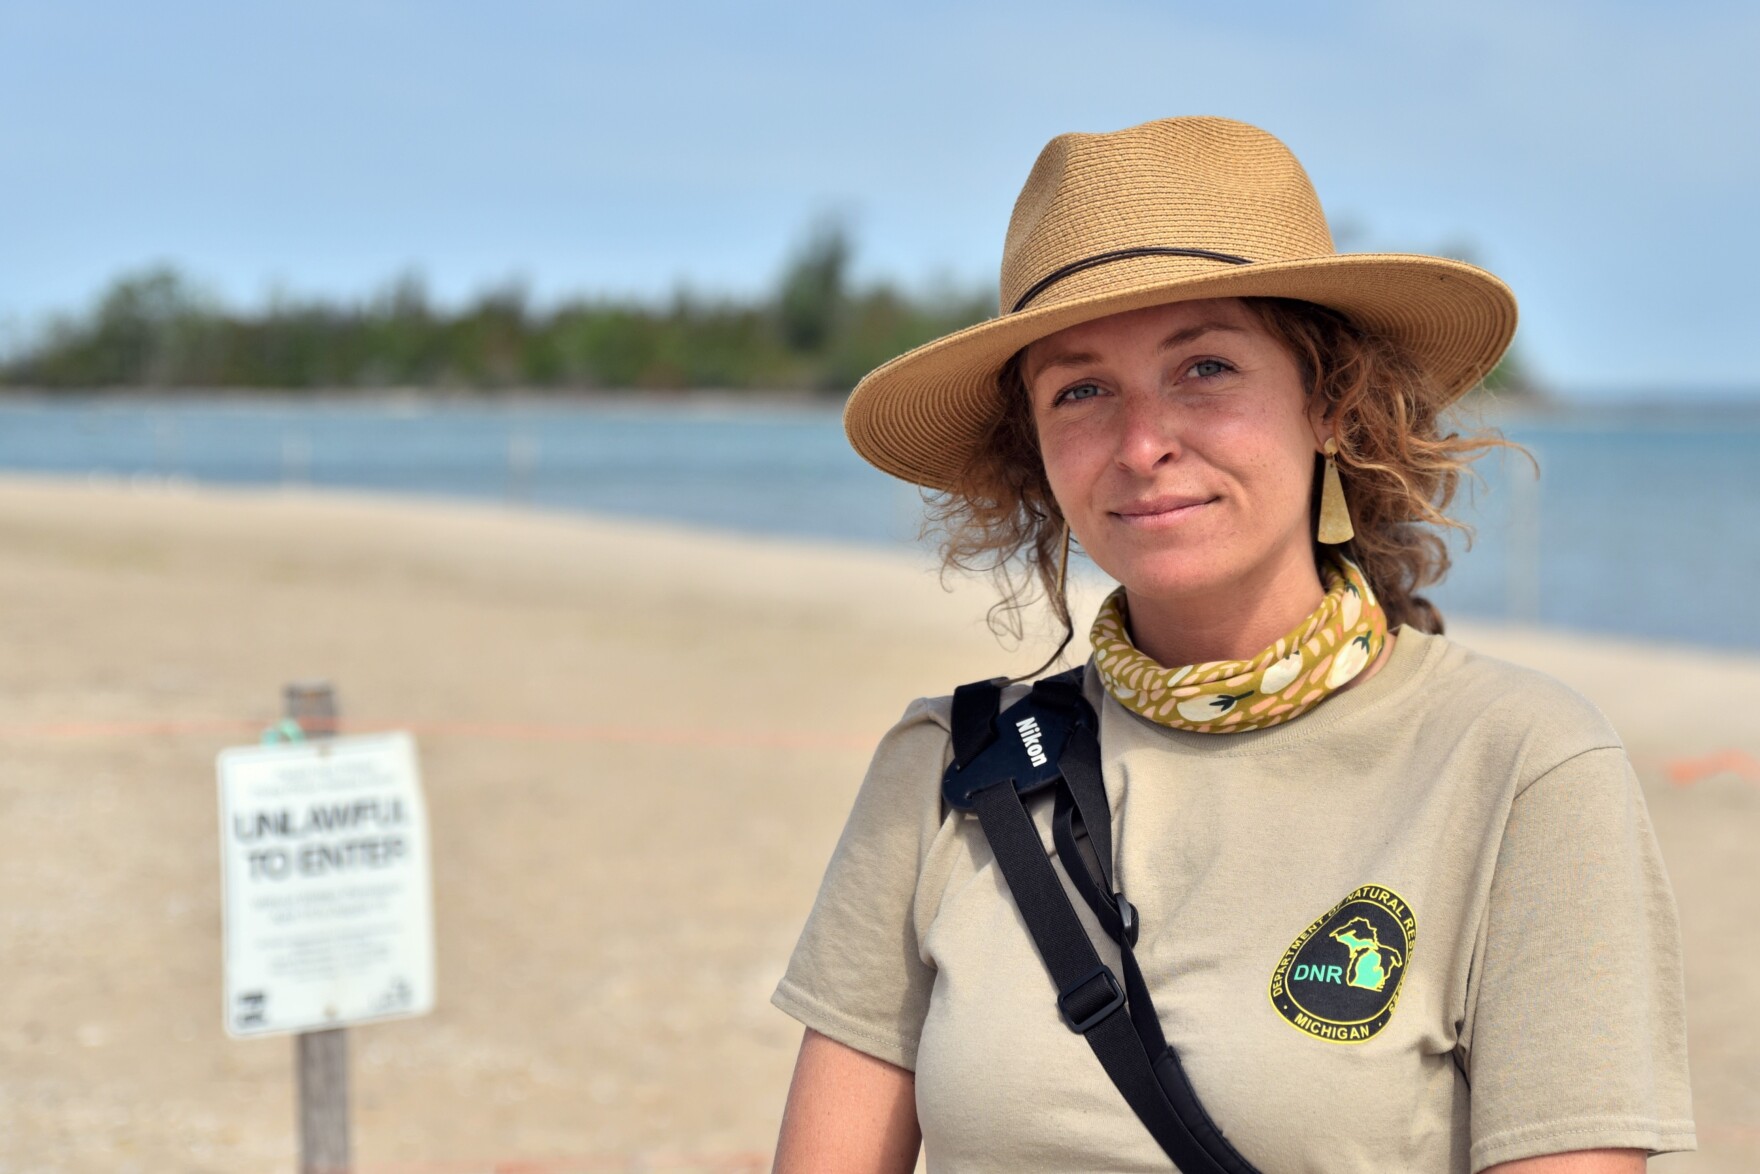 a younger white woman standing on the beach with water behind her wearing a national park t-shirt and a wide brimmed hat smiles at the camera